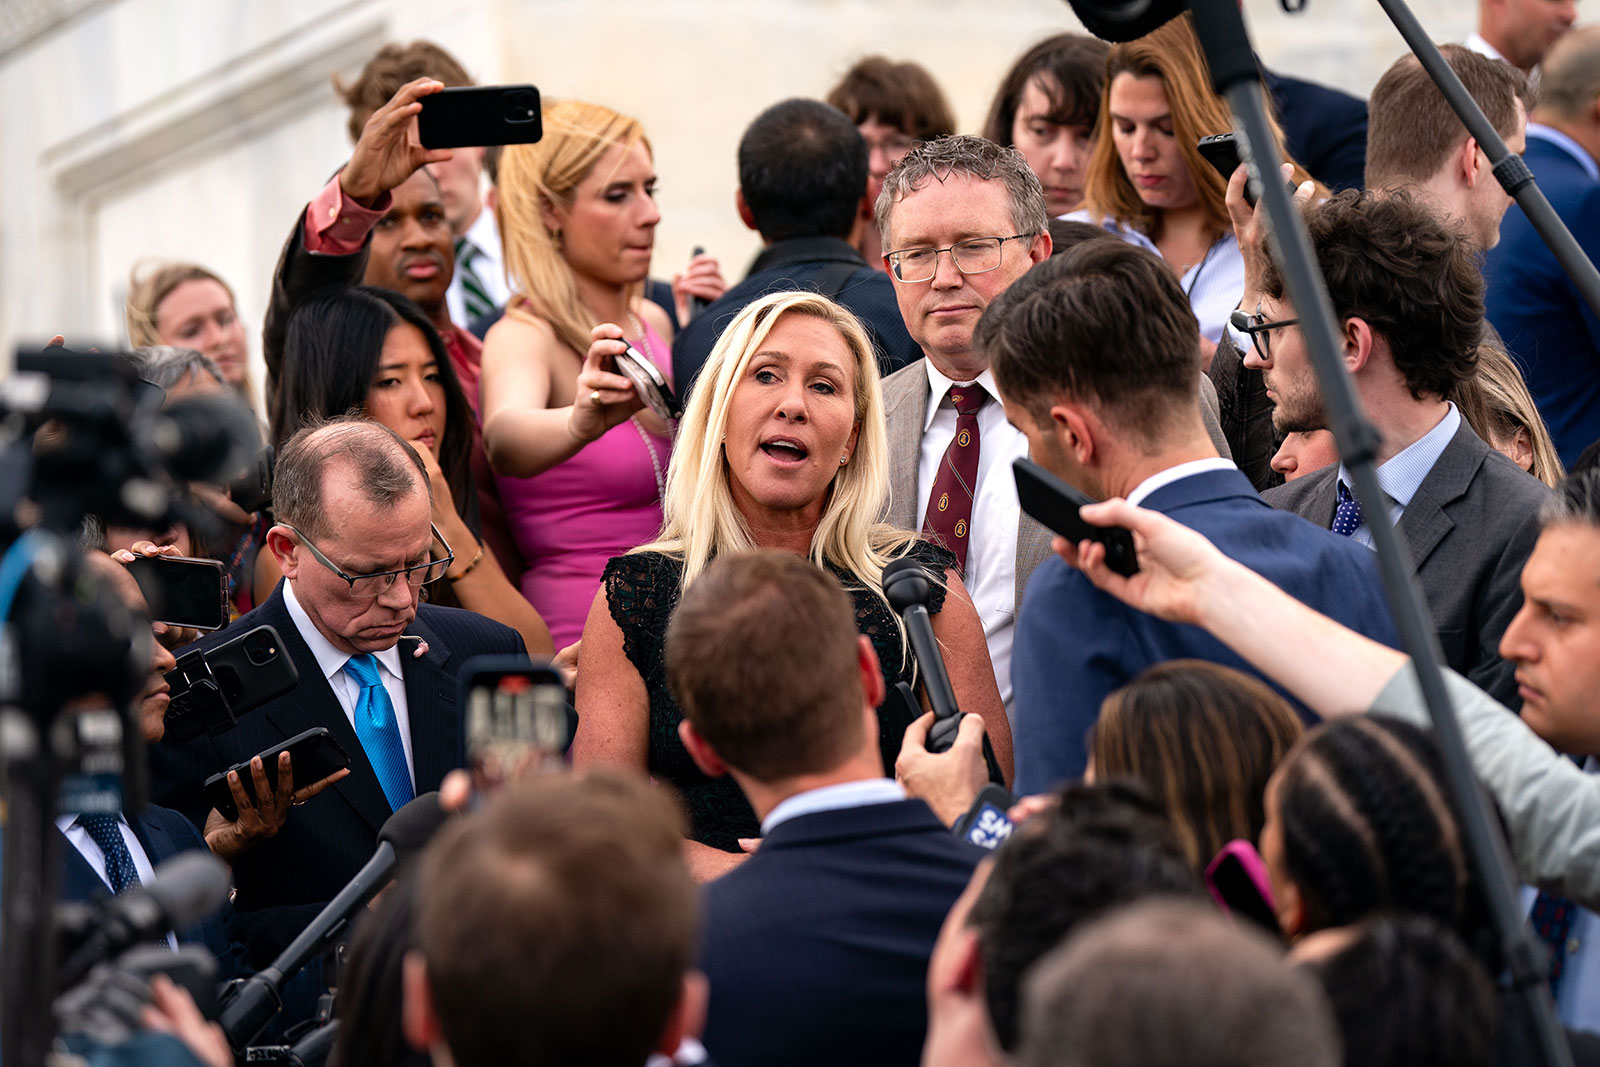 Rep. Marjorie Taylor Greene and Rep. Thomas Massie speak to members of the press on the steps of the House of Representatives at the US Capitol on Wednesday, May 8.